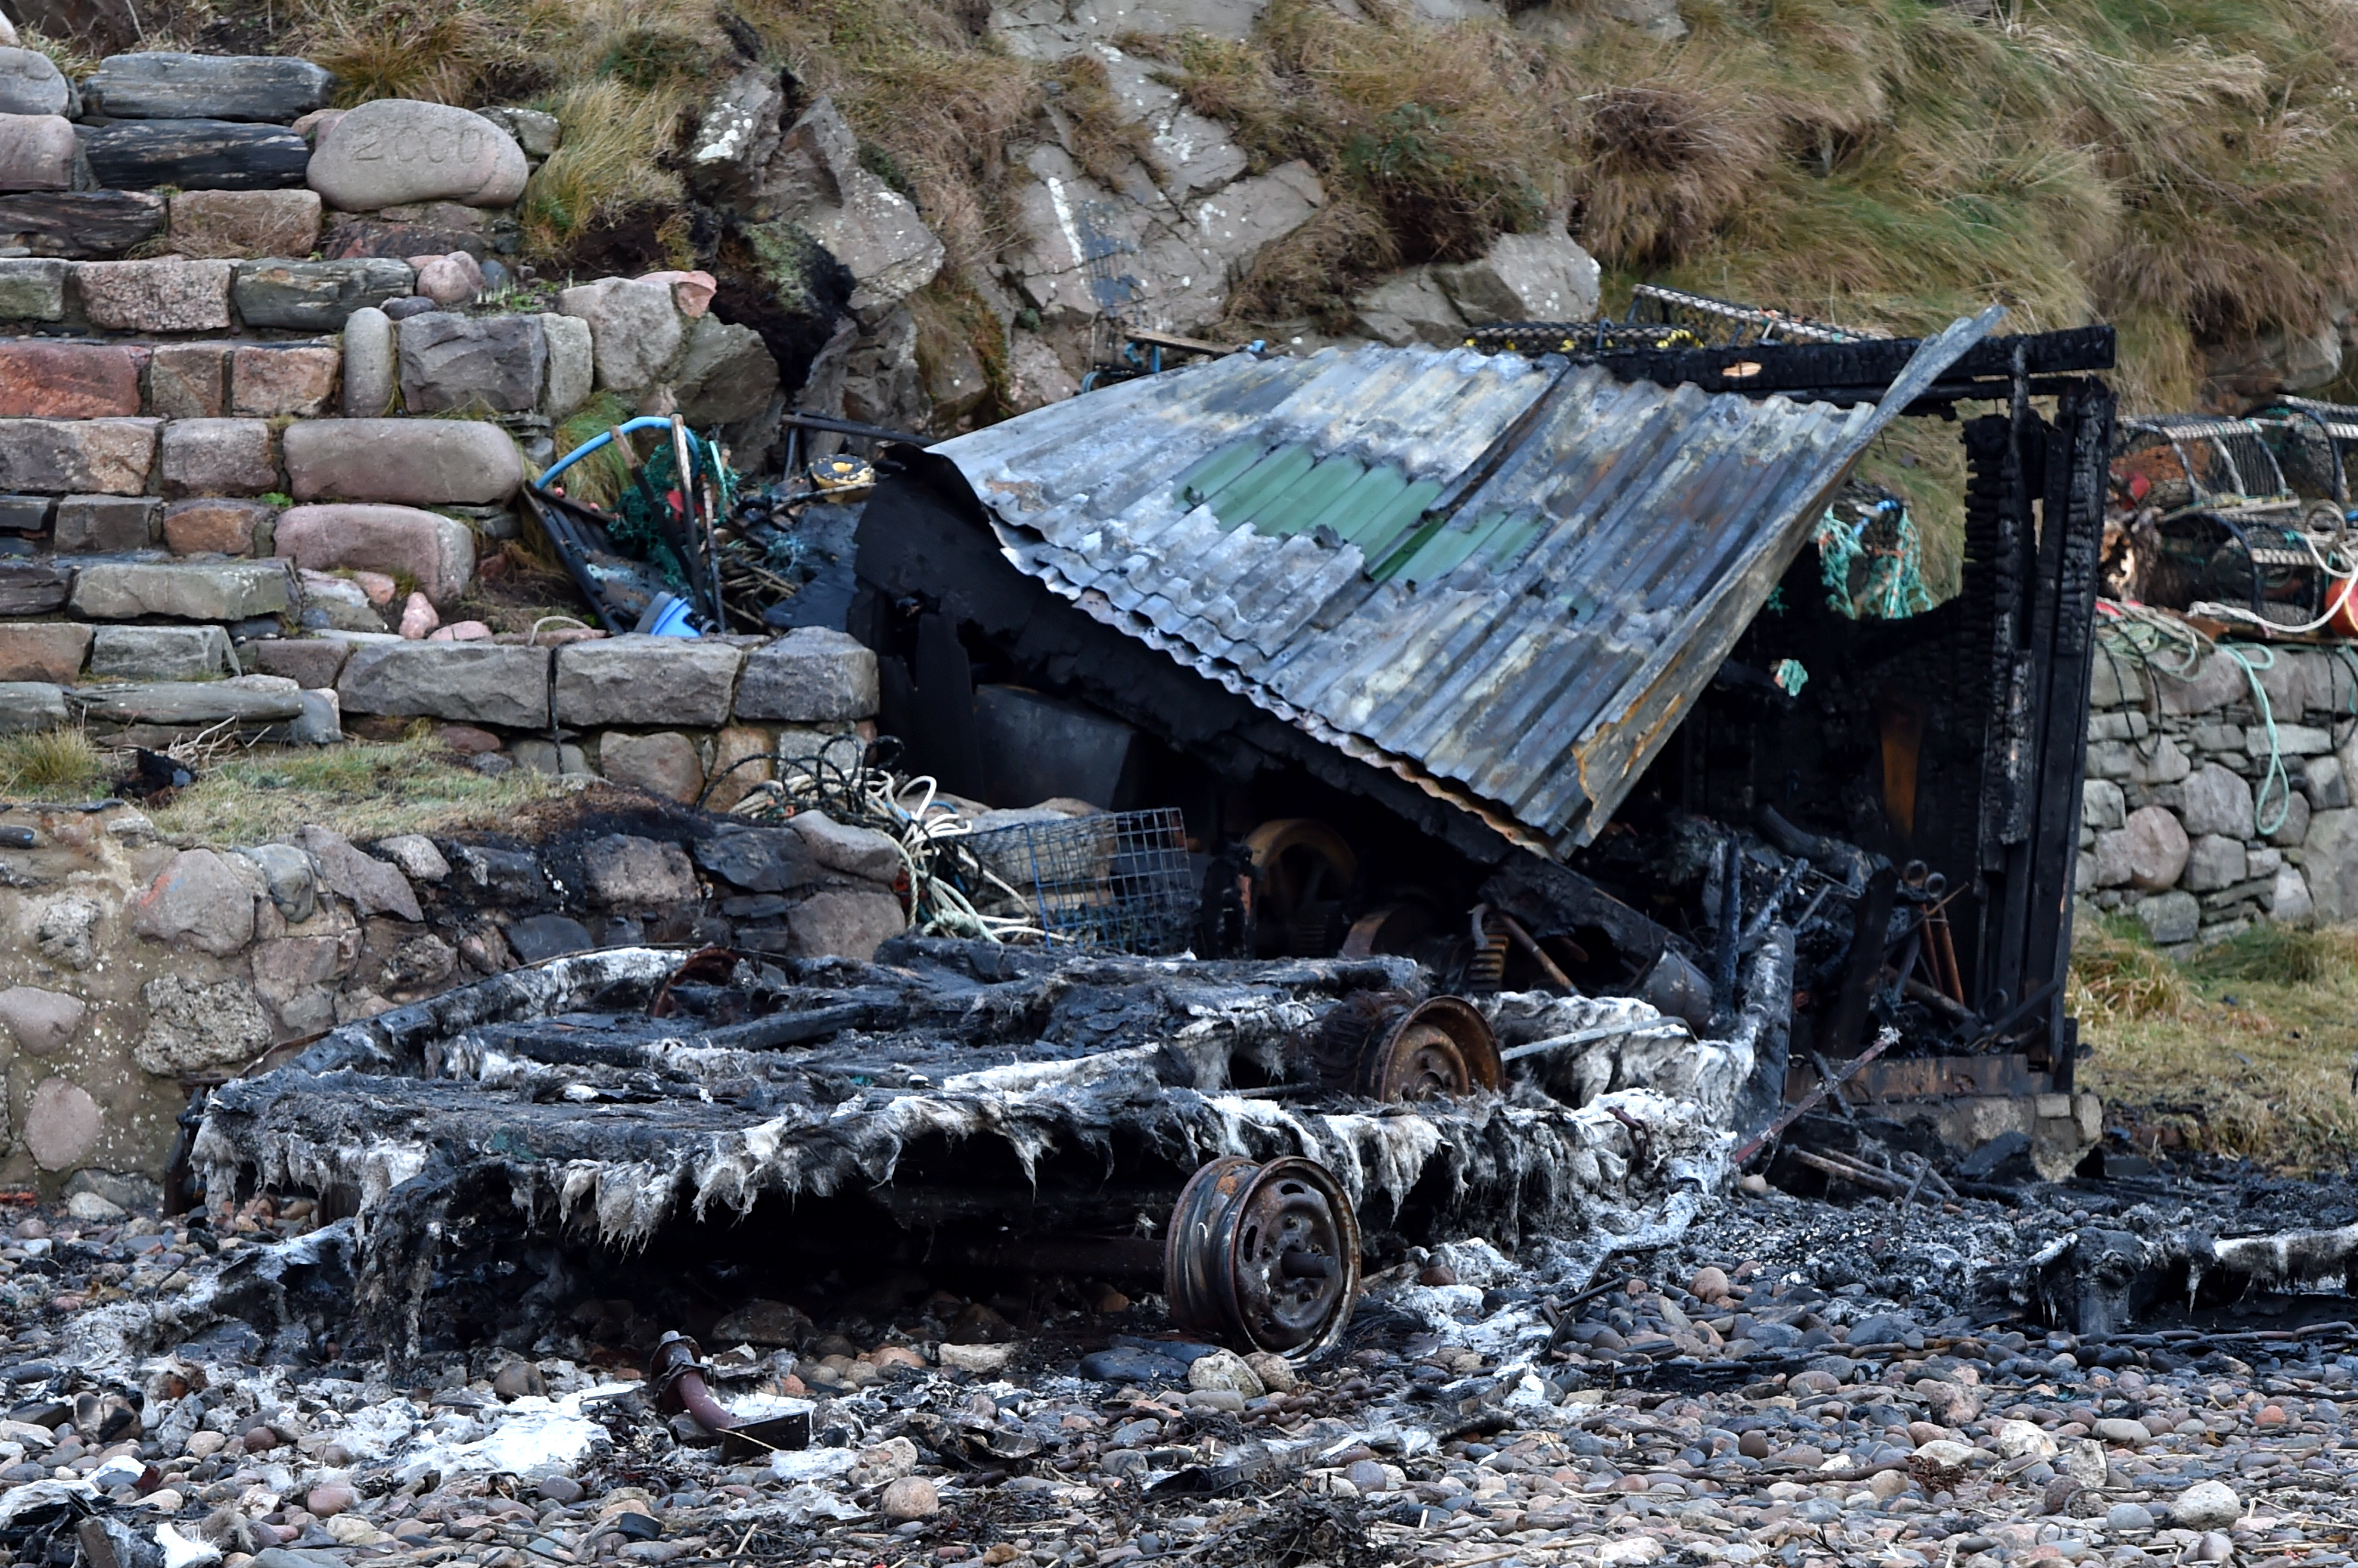 The boats are charred and blackened as a result of the incident.